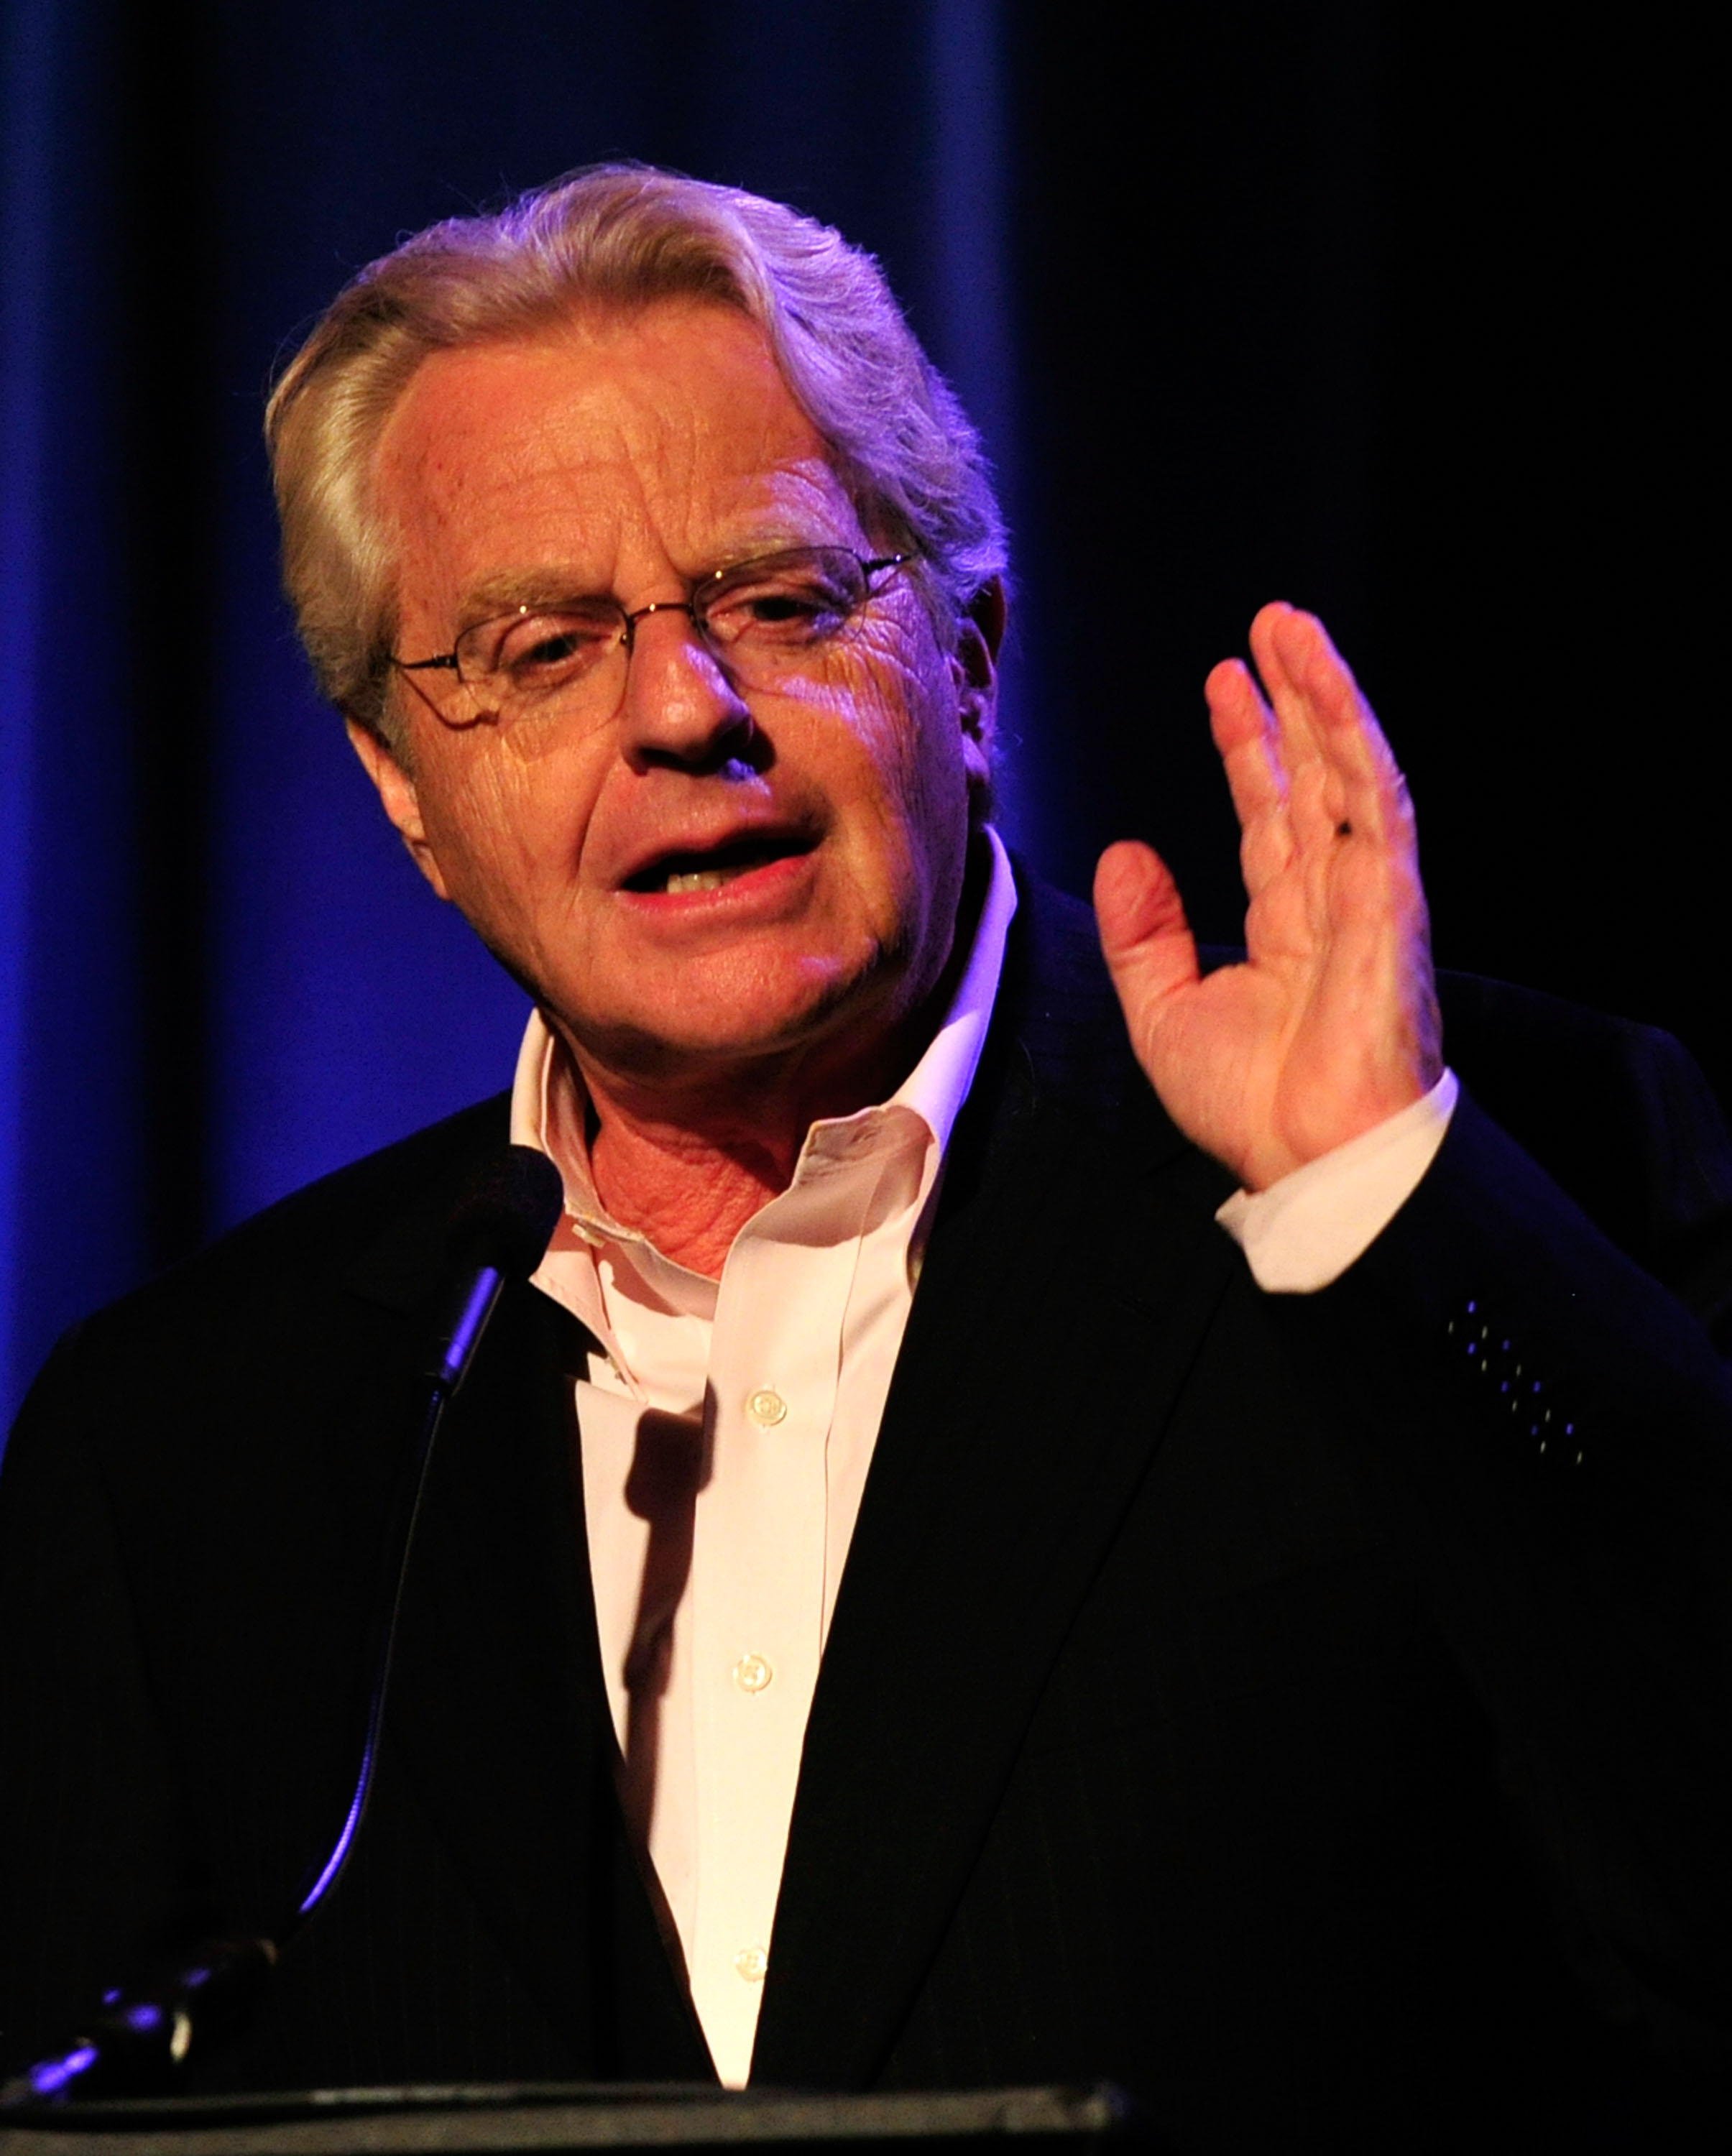 Jerry Springer Weighs In On Those Debates.